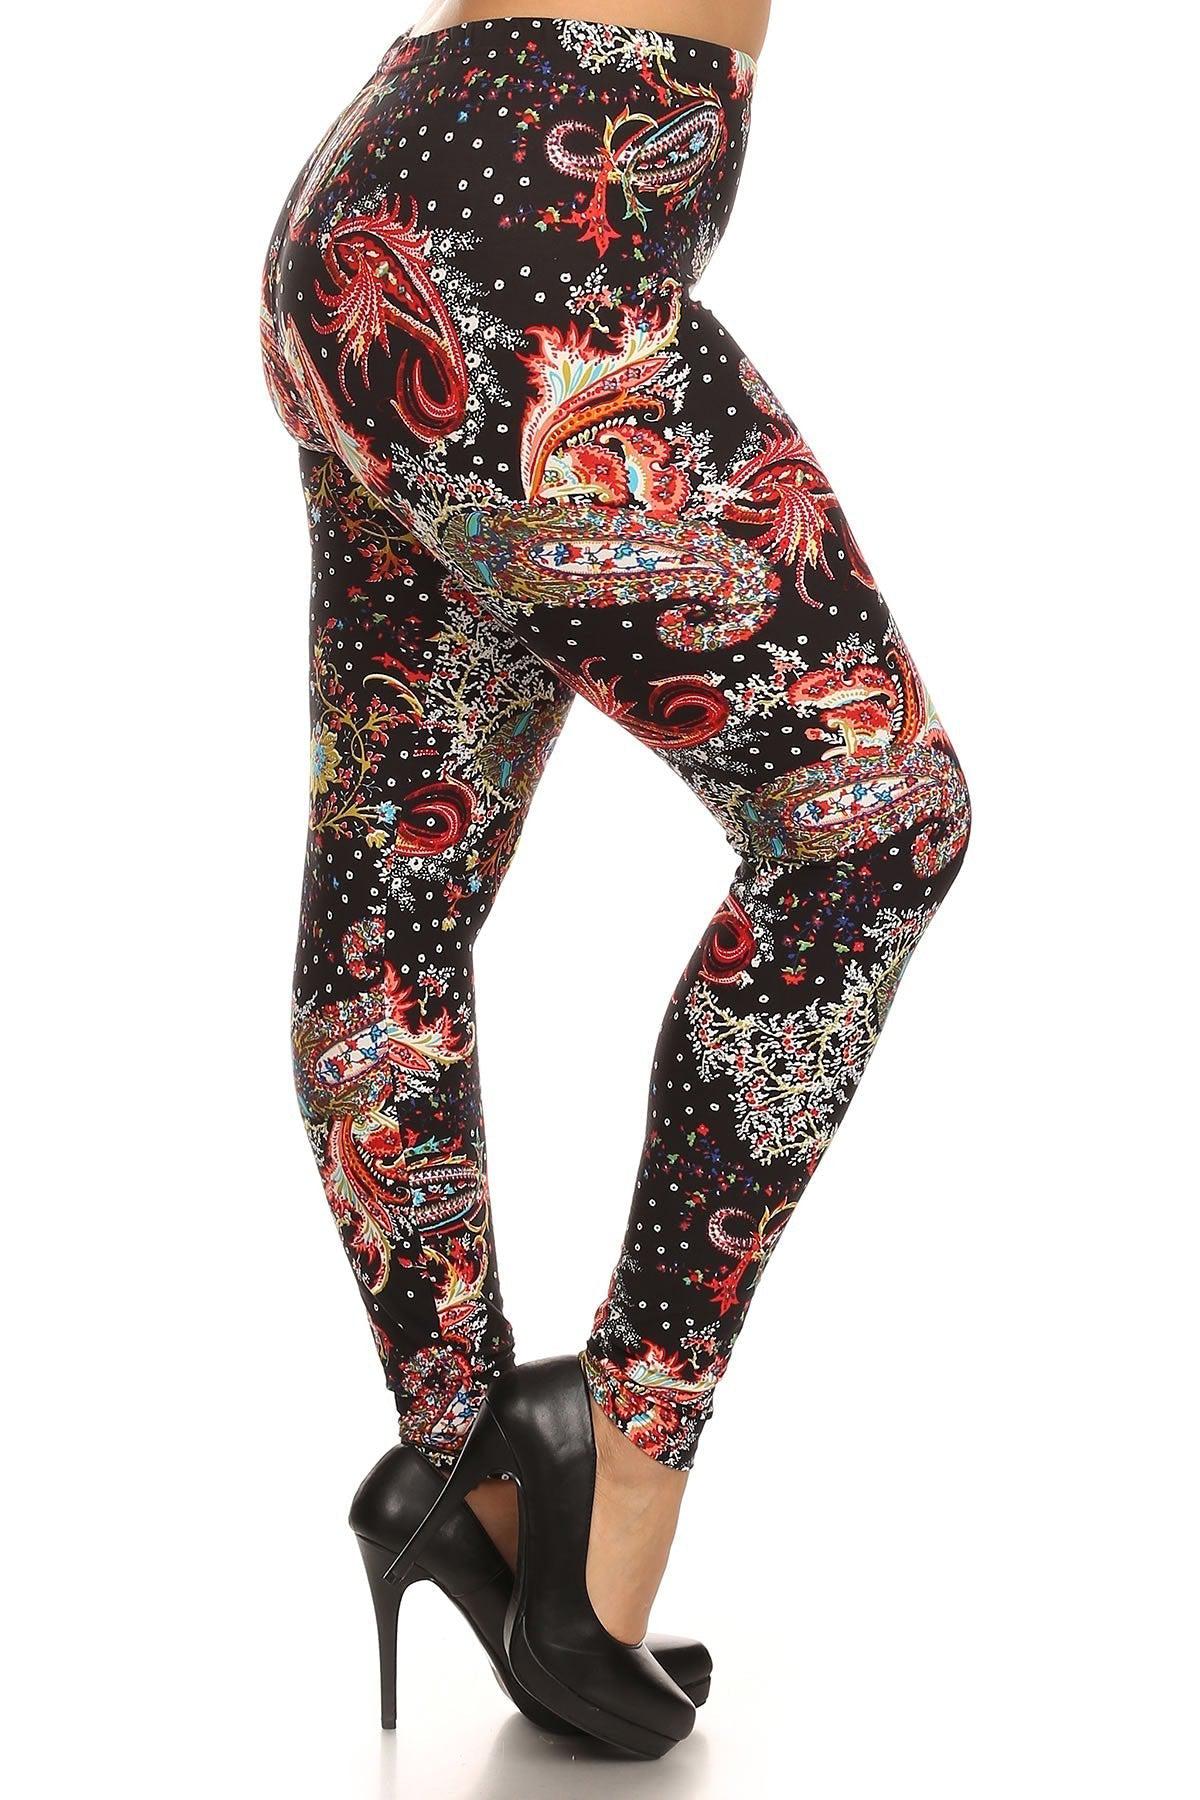 Multi-color Paisley Print, Banded, Full Length Leggings In A Fitted Style With A High Waisted Blue Zone Planet